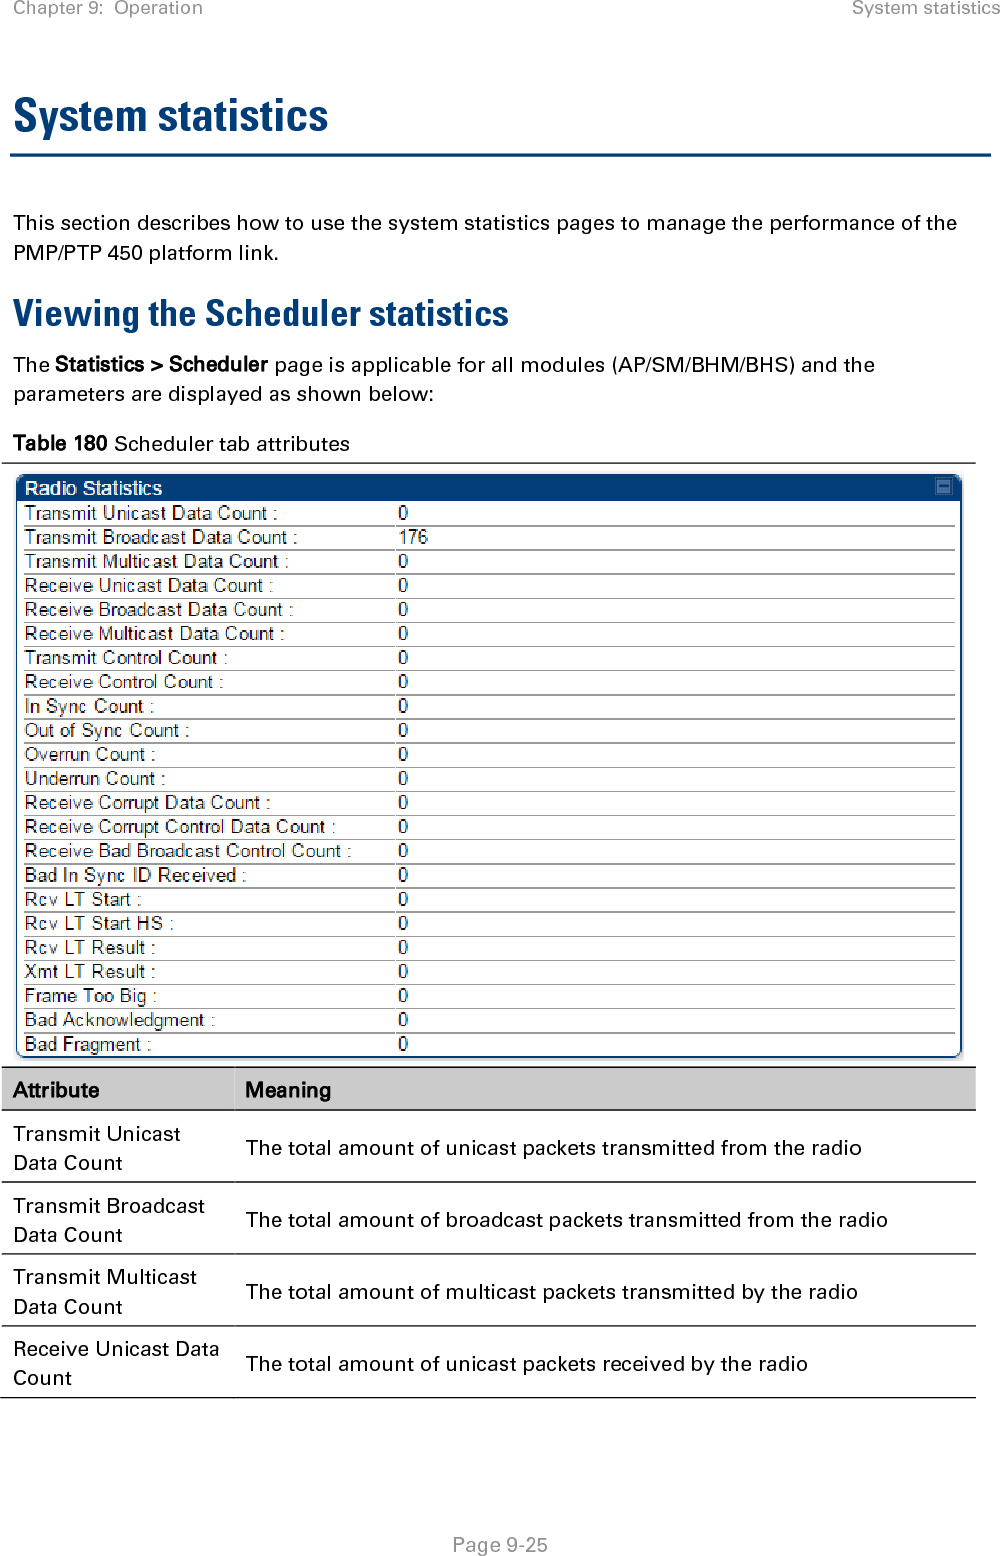 Chapter 9:  Operation System statistics   Page 9-25 System statistics This section describes how to use the system statistics pages to manage the performance of the PMP/PTP 450 platform link. Viewing the Scheduler statistics The Statistics &gt; Scheduler page is applicable for all modules (AP/SM/BHM/BHS) and the parameters are displayed as shown below: Table 180 Scheduler tab attributes  Attribute Meaning Transmit Unicast Data Count The total amount of unicast packets transmitted from the radio Transmit Broadcast Data Count The total amount of broadcast packets transmitted from the radio Transmit Multicast Data Count The total amount of multicast packets transmitted by the radio Receive Unicast Data Count The total amount of unicast packets received by the radio 